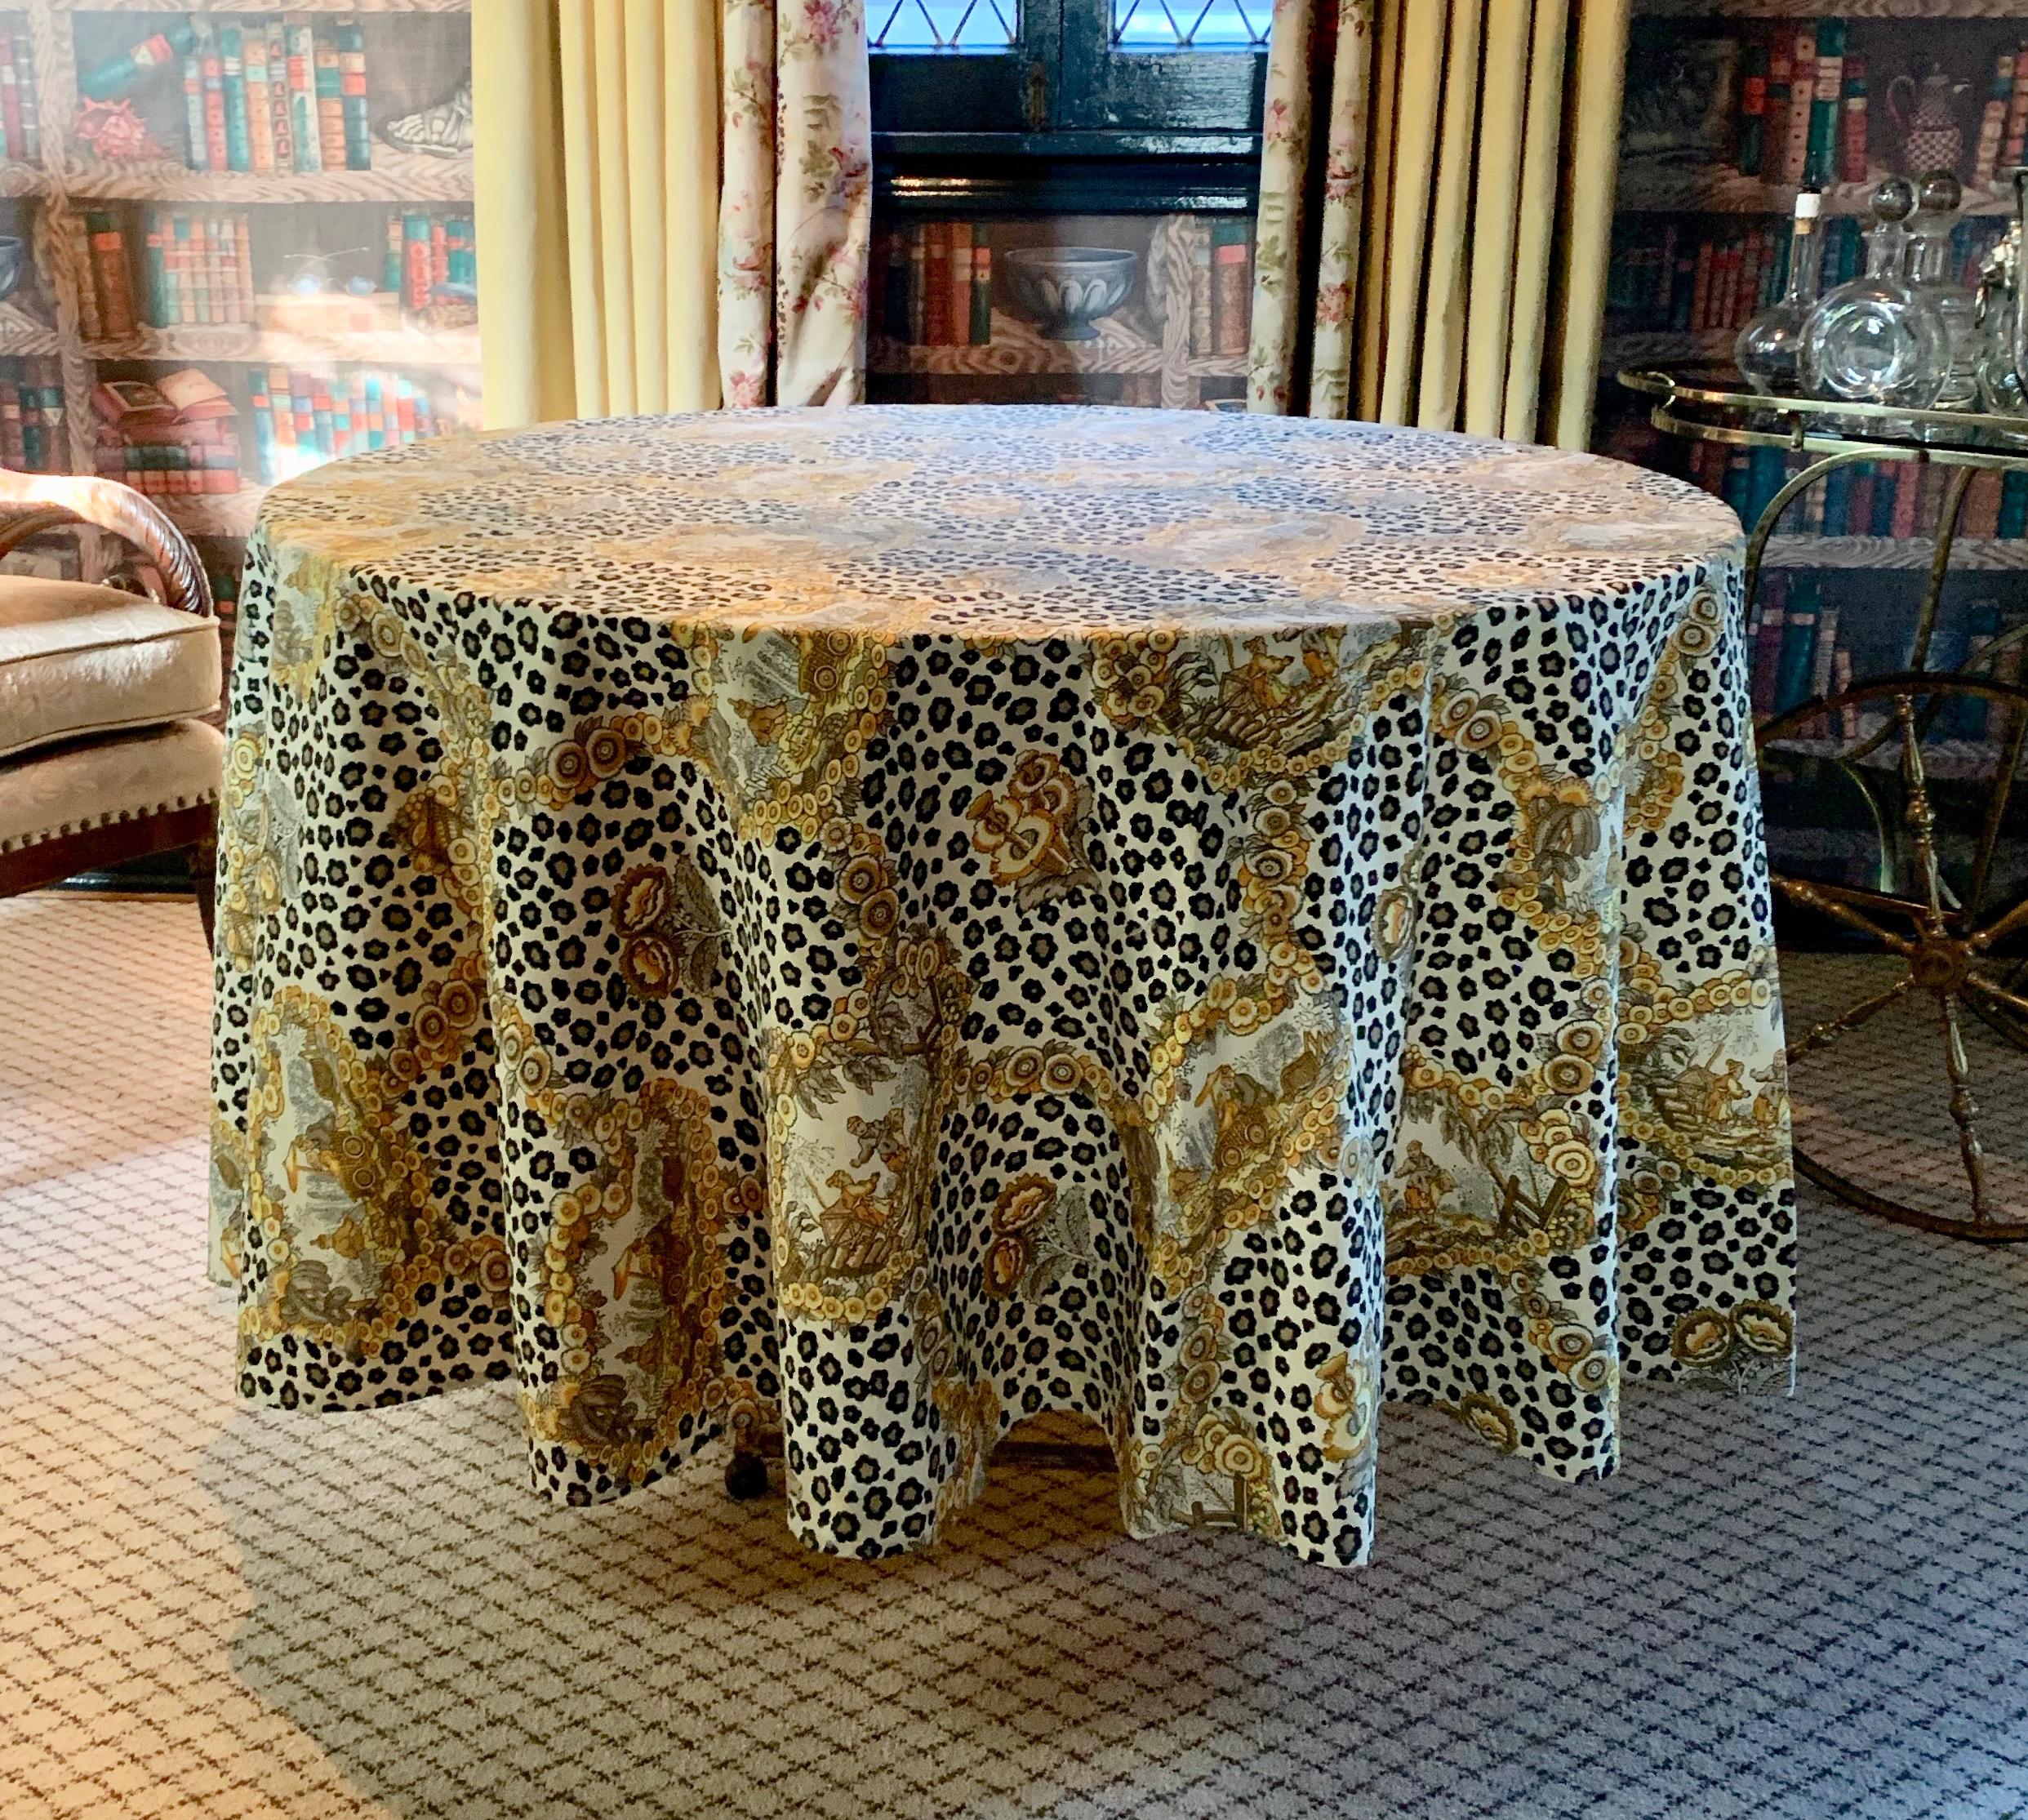 Stunning leopard and chinoiserie table cloth - a handsome statement in style, starting the conversation before the first drink, this cloth is the appetizer.

Crossing over two styles of bold leopard with Chinese motifs - it doesn't get better for